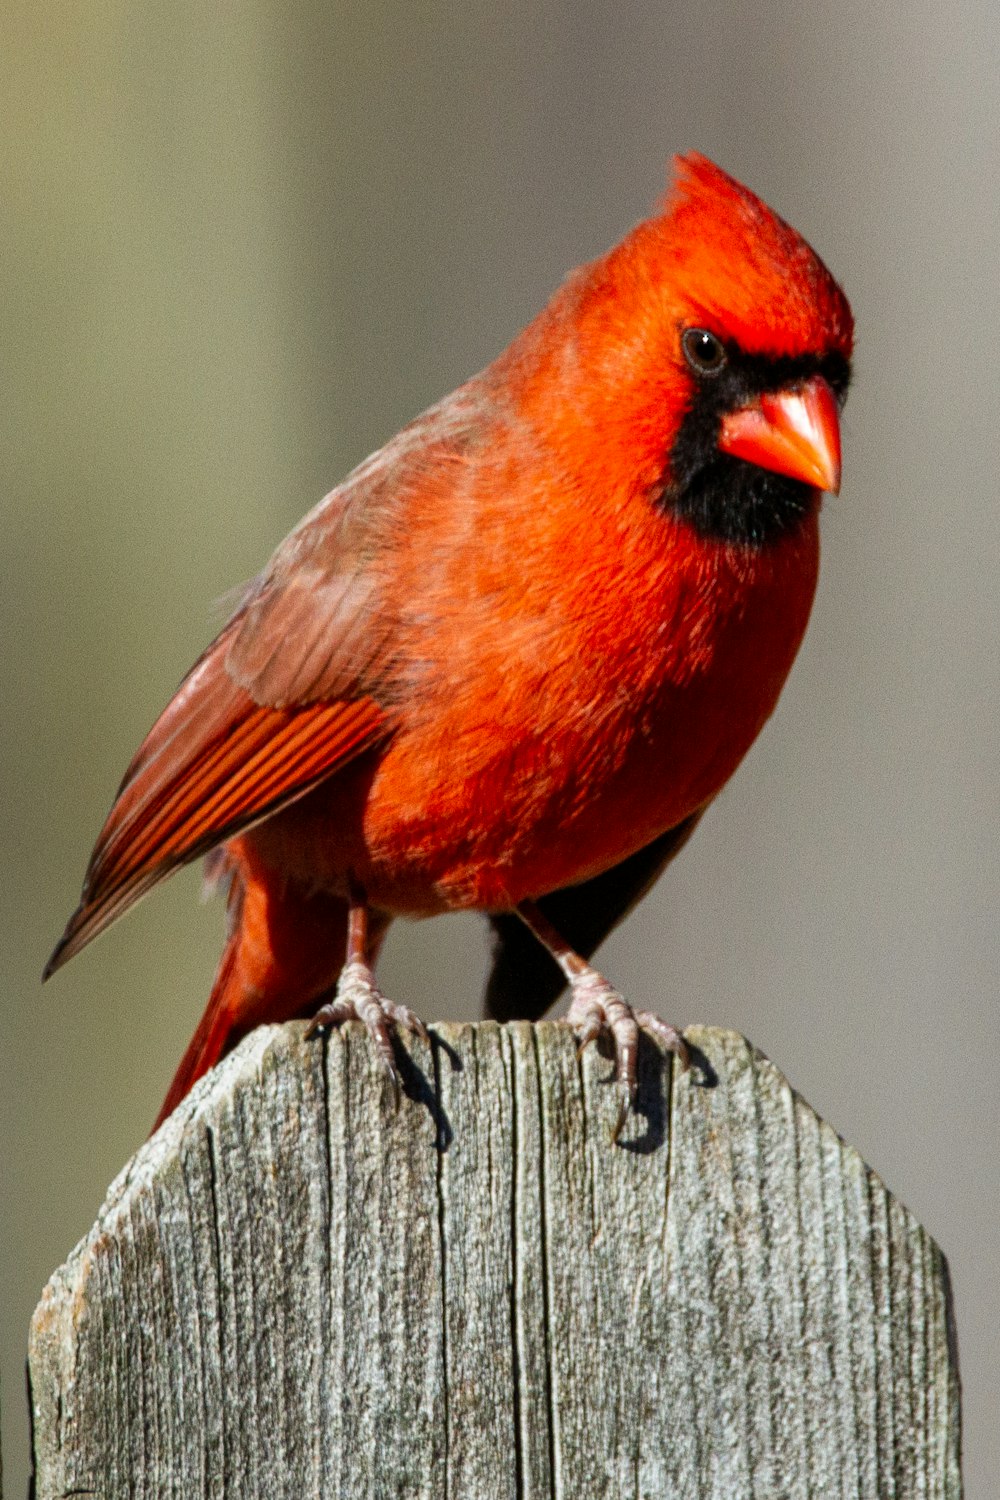 red and black bird on gray wooden fence